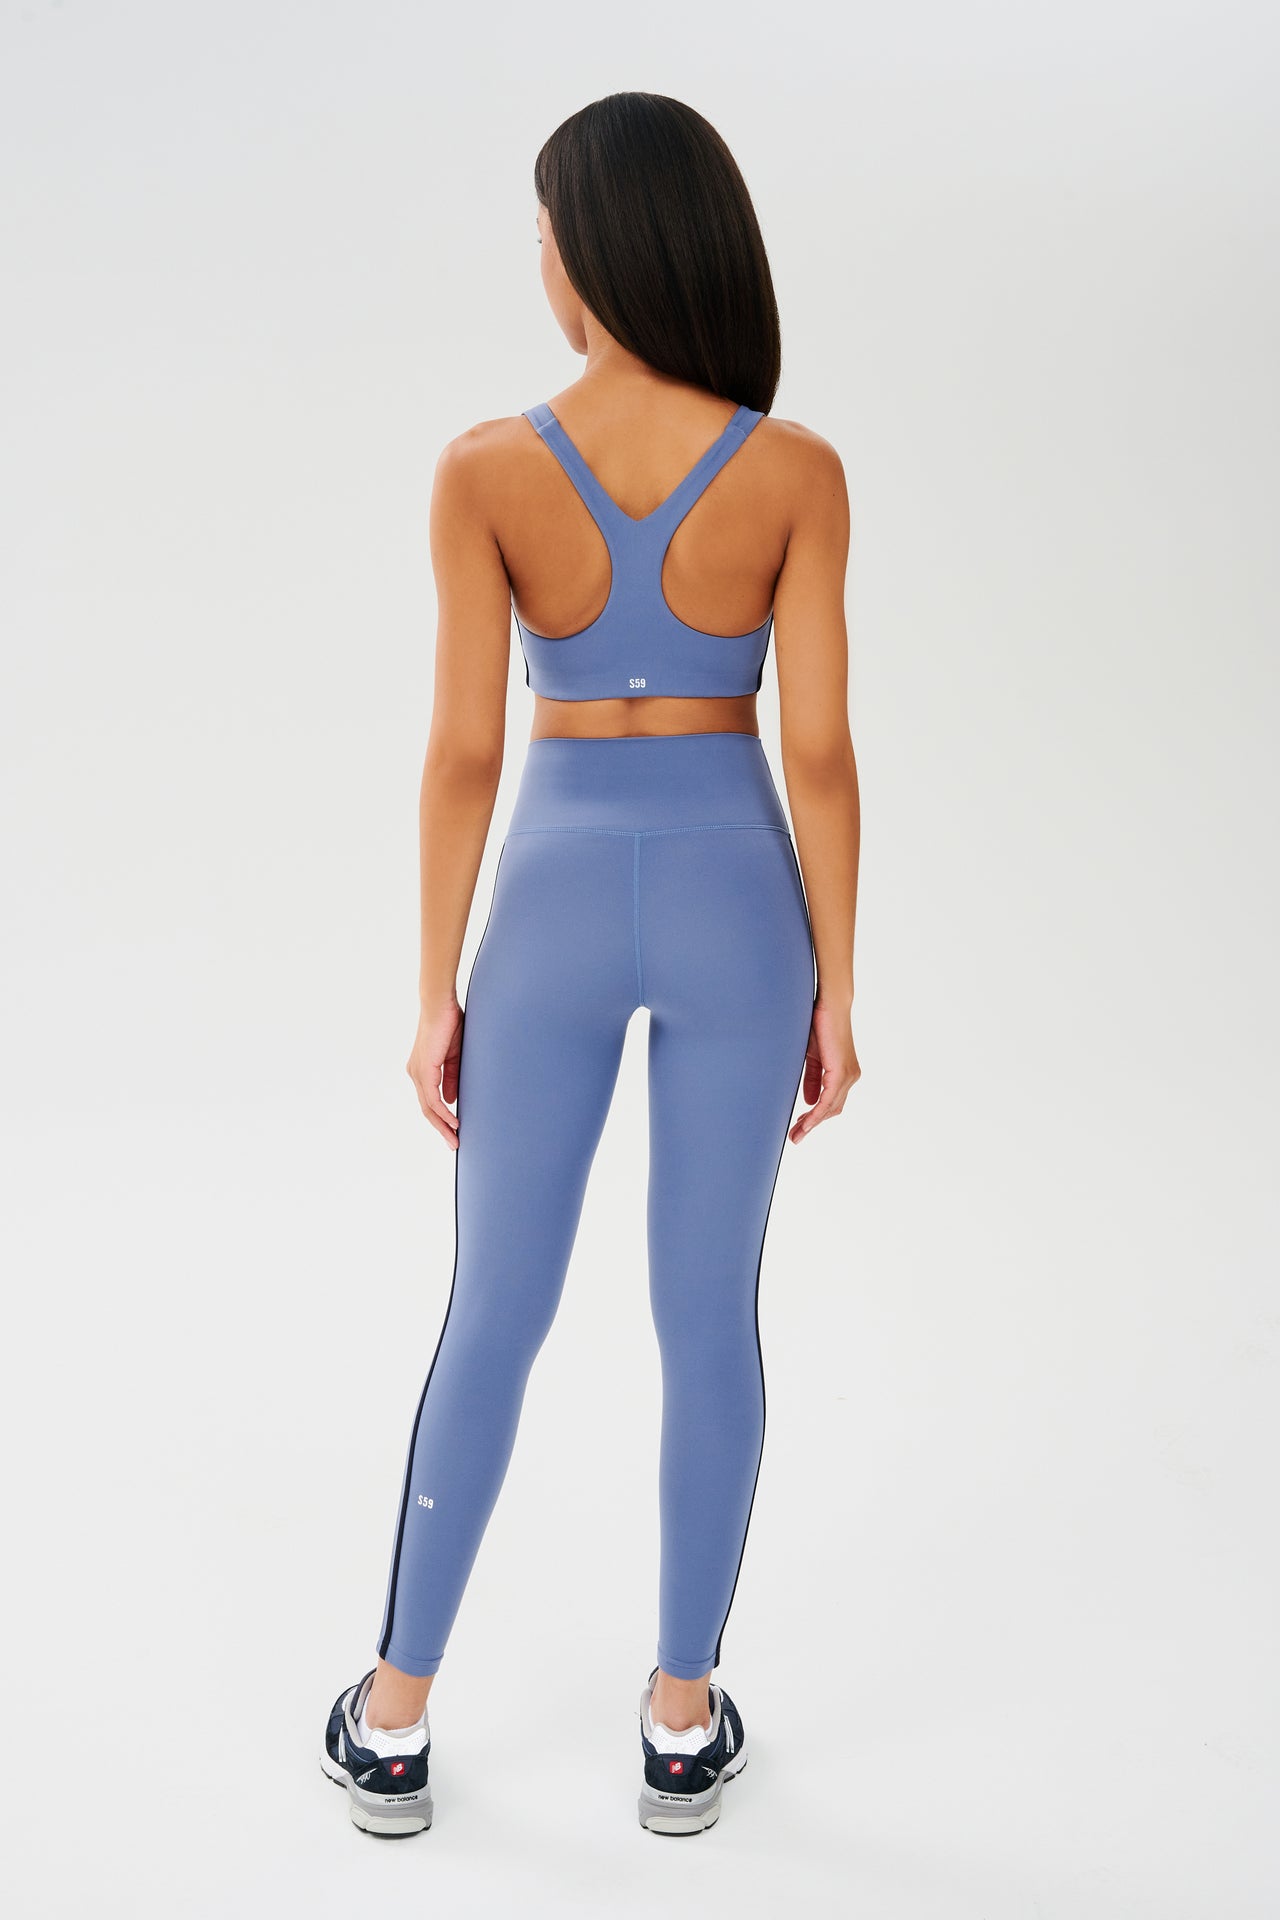 Full back view of girl wearing light blue leggings with thin white and black stripes down the side and a light blue sports bra with dark blue shoes